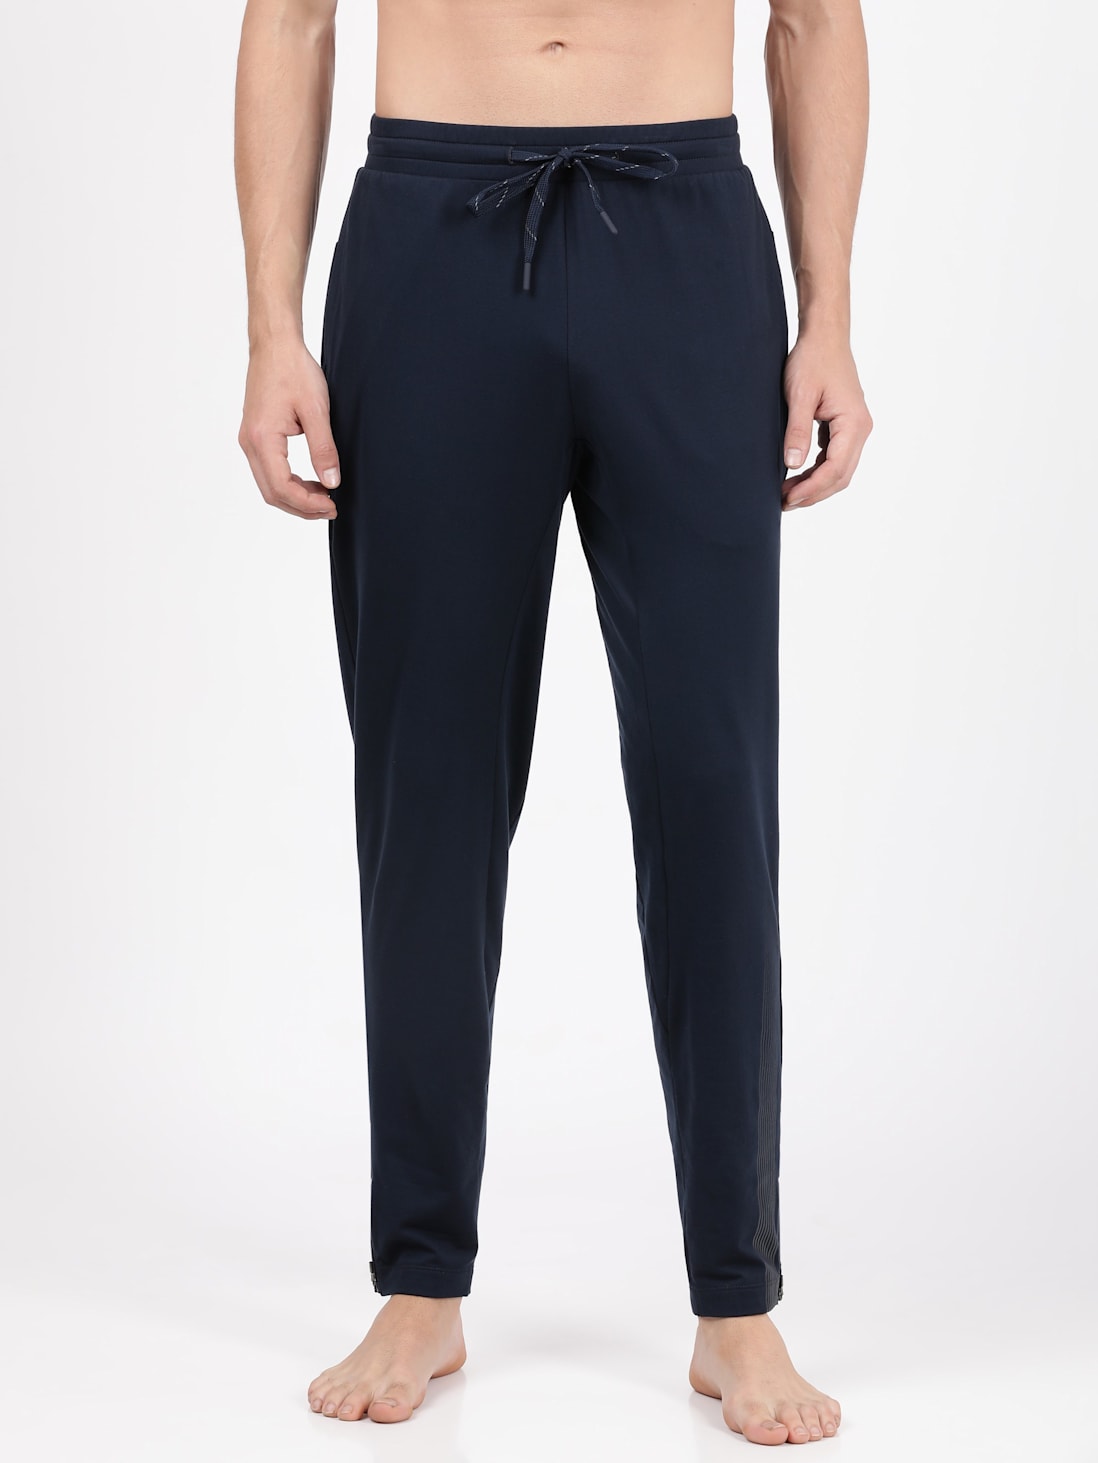 Sports Track Pants Lined (Microfibre) - Navy - FCW